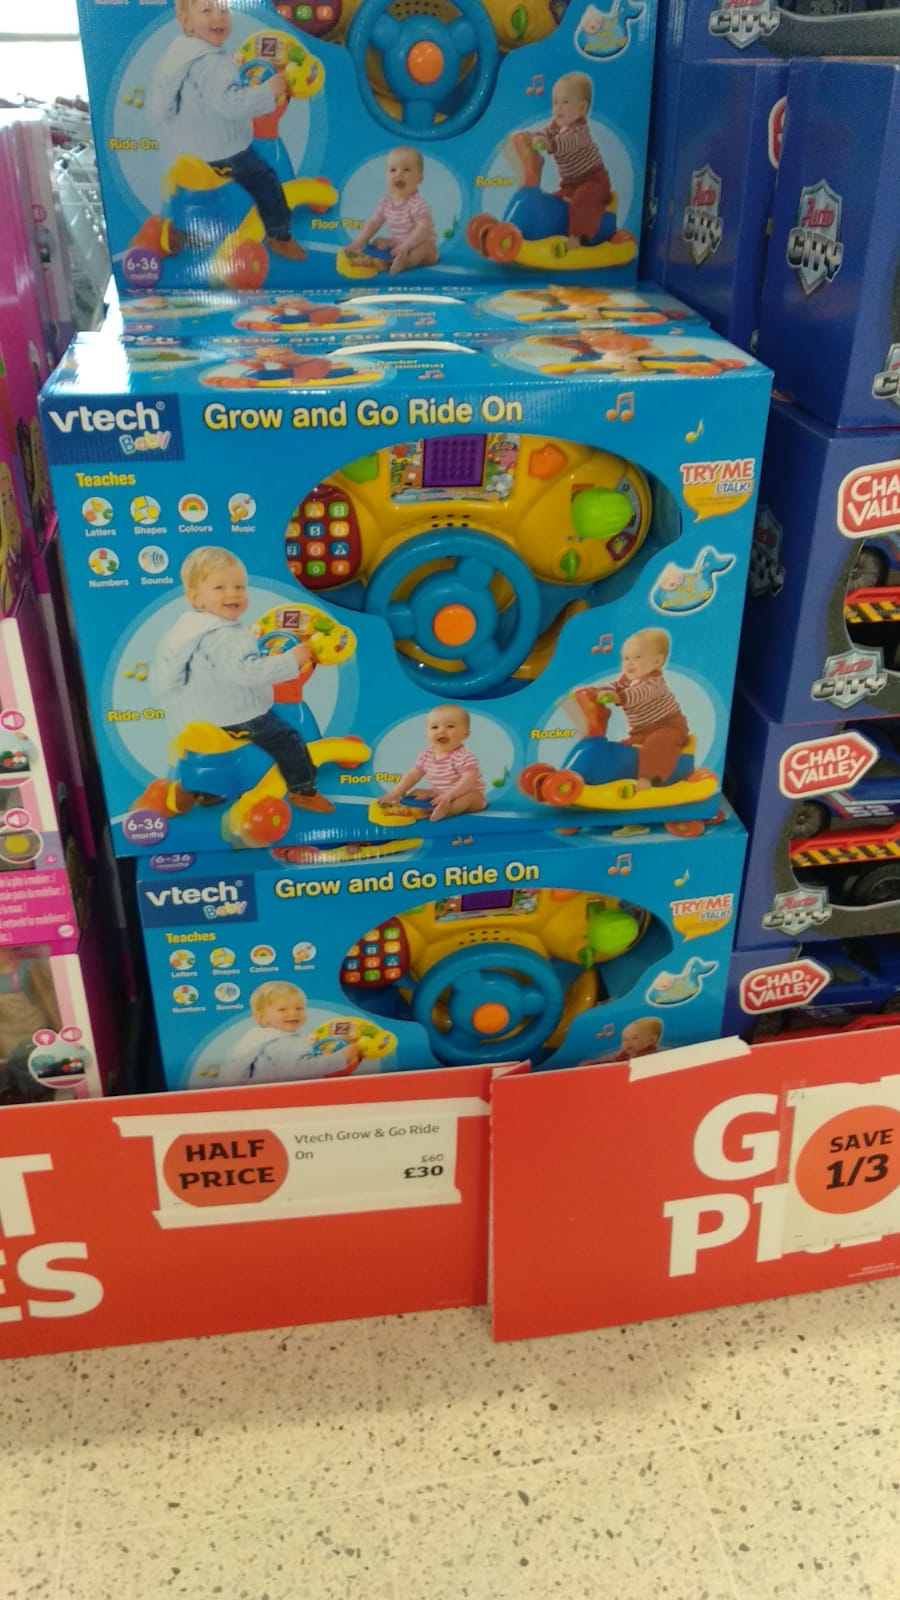 Vtech Grow and Go ride on £30 in 